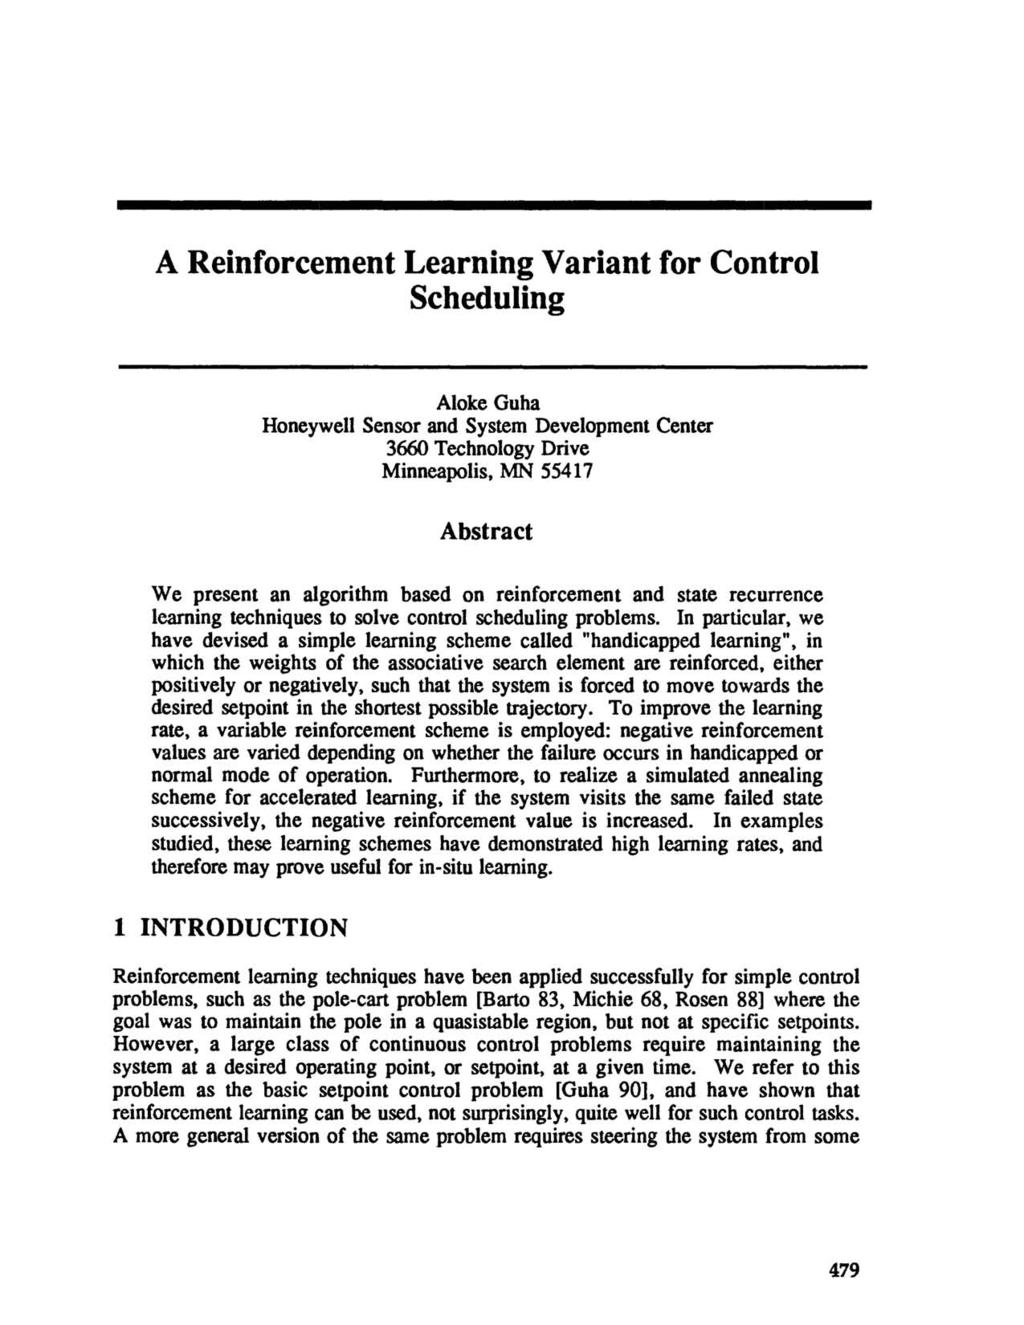 A Reinforcement Learning Variant for Control Scheduling Aloke Guha Honeywell Sensor and System Development Center 3660 Technology Drive Minneapolis MN 55417 Abstract We present an algorithm based on